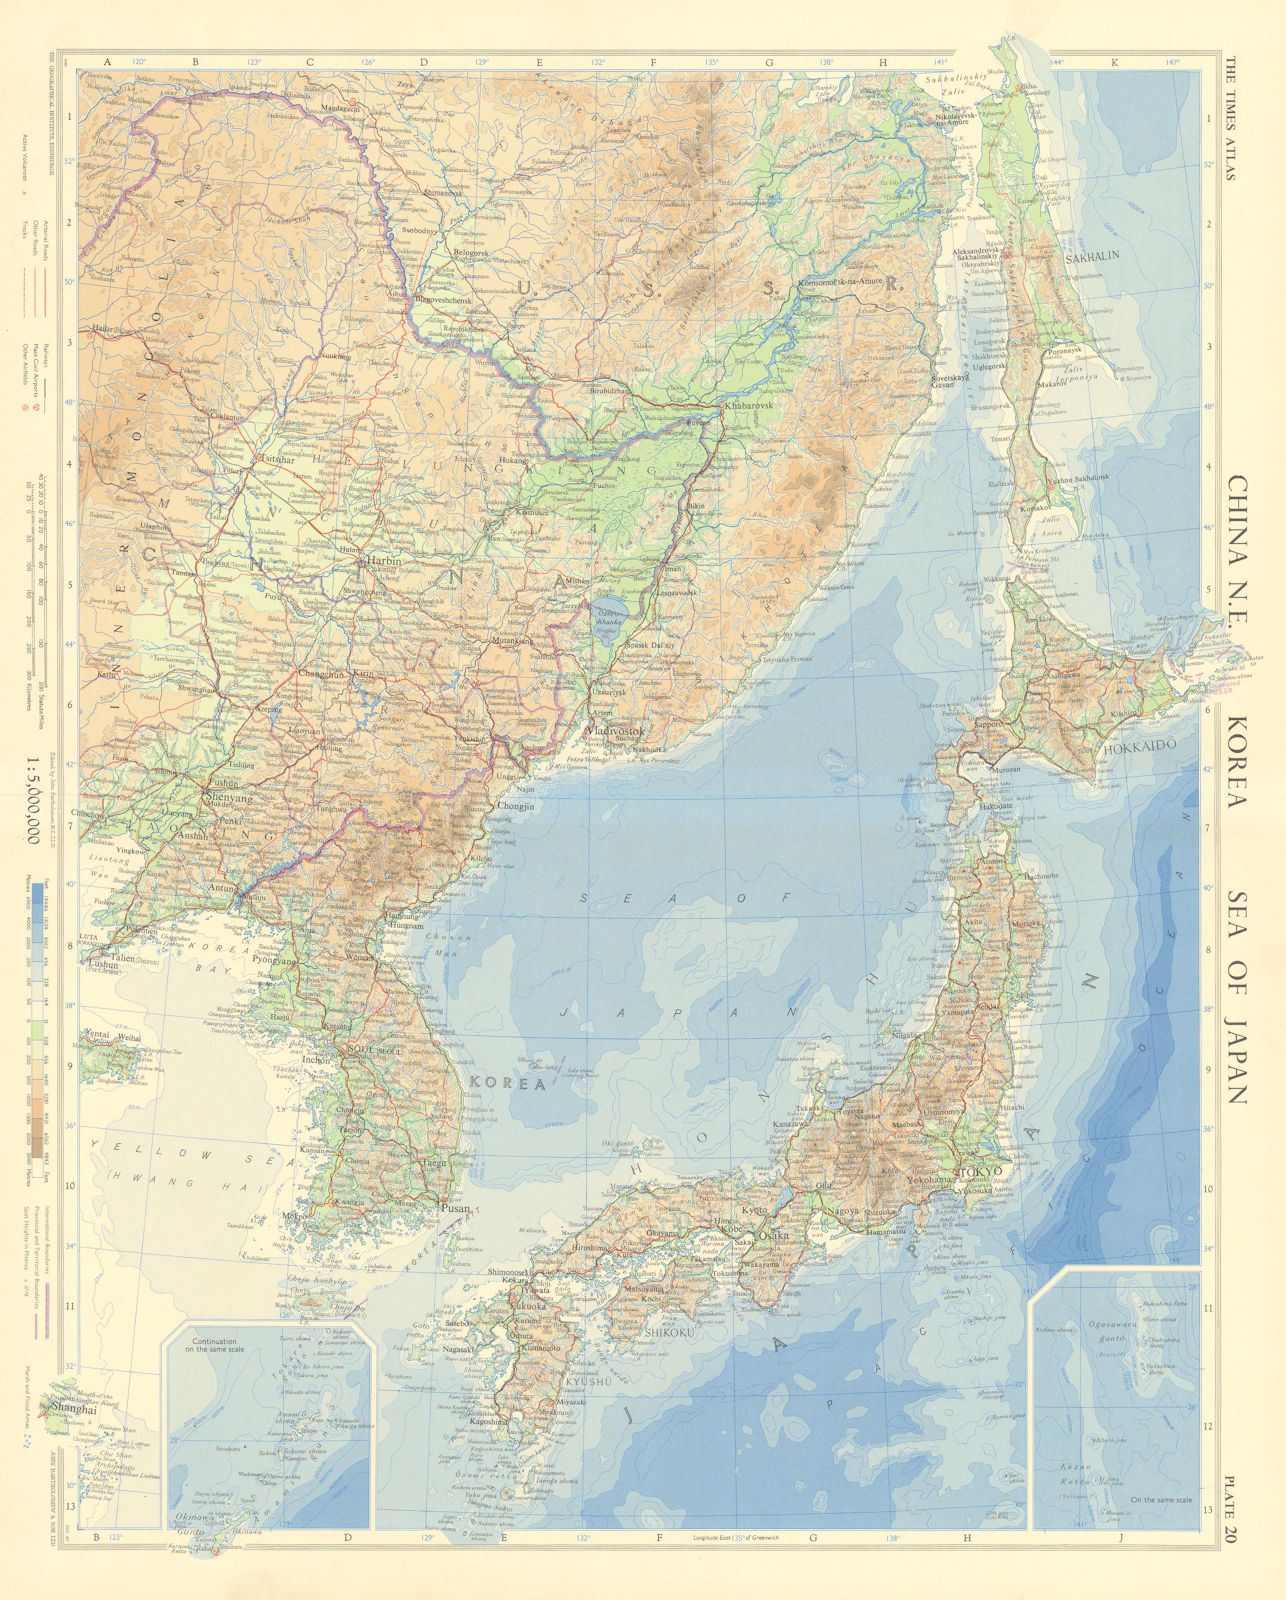 North-east China Korea Japan Russian Far East. North East Asia. TIMES 1958 map